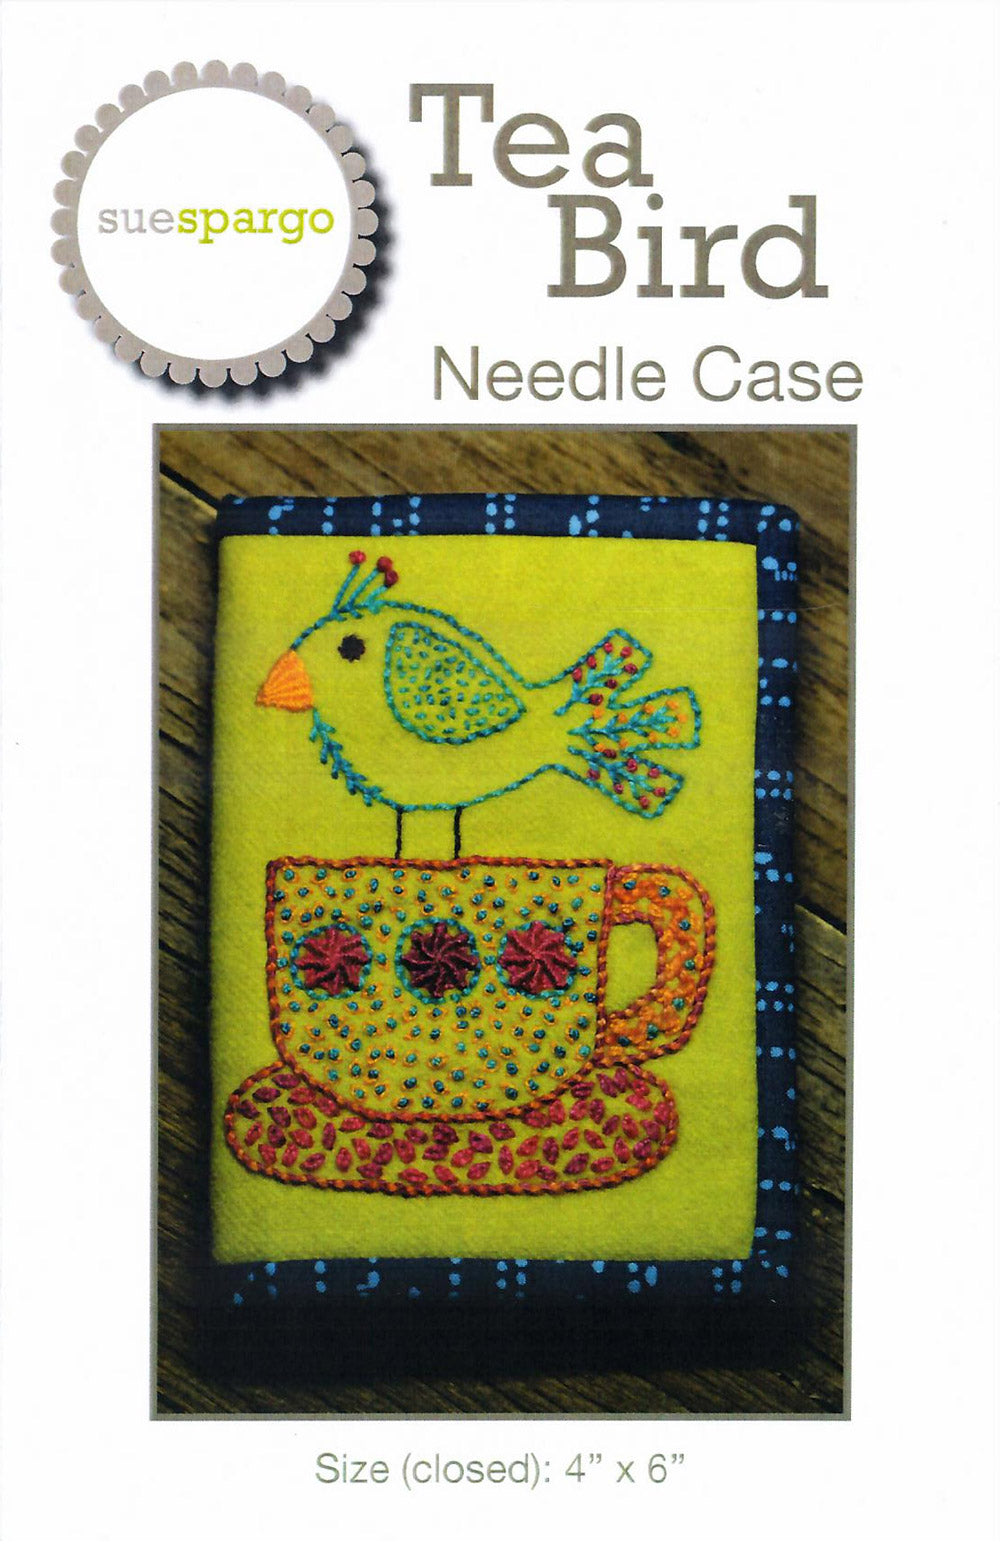 Tea Bird Needle Case - Applique, Embroidery, and Sewing Pattern by Sue Spargo of Folk Art Quilts